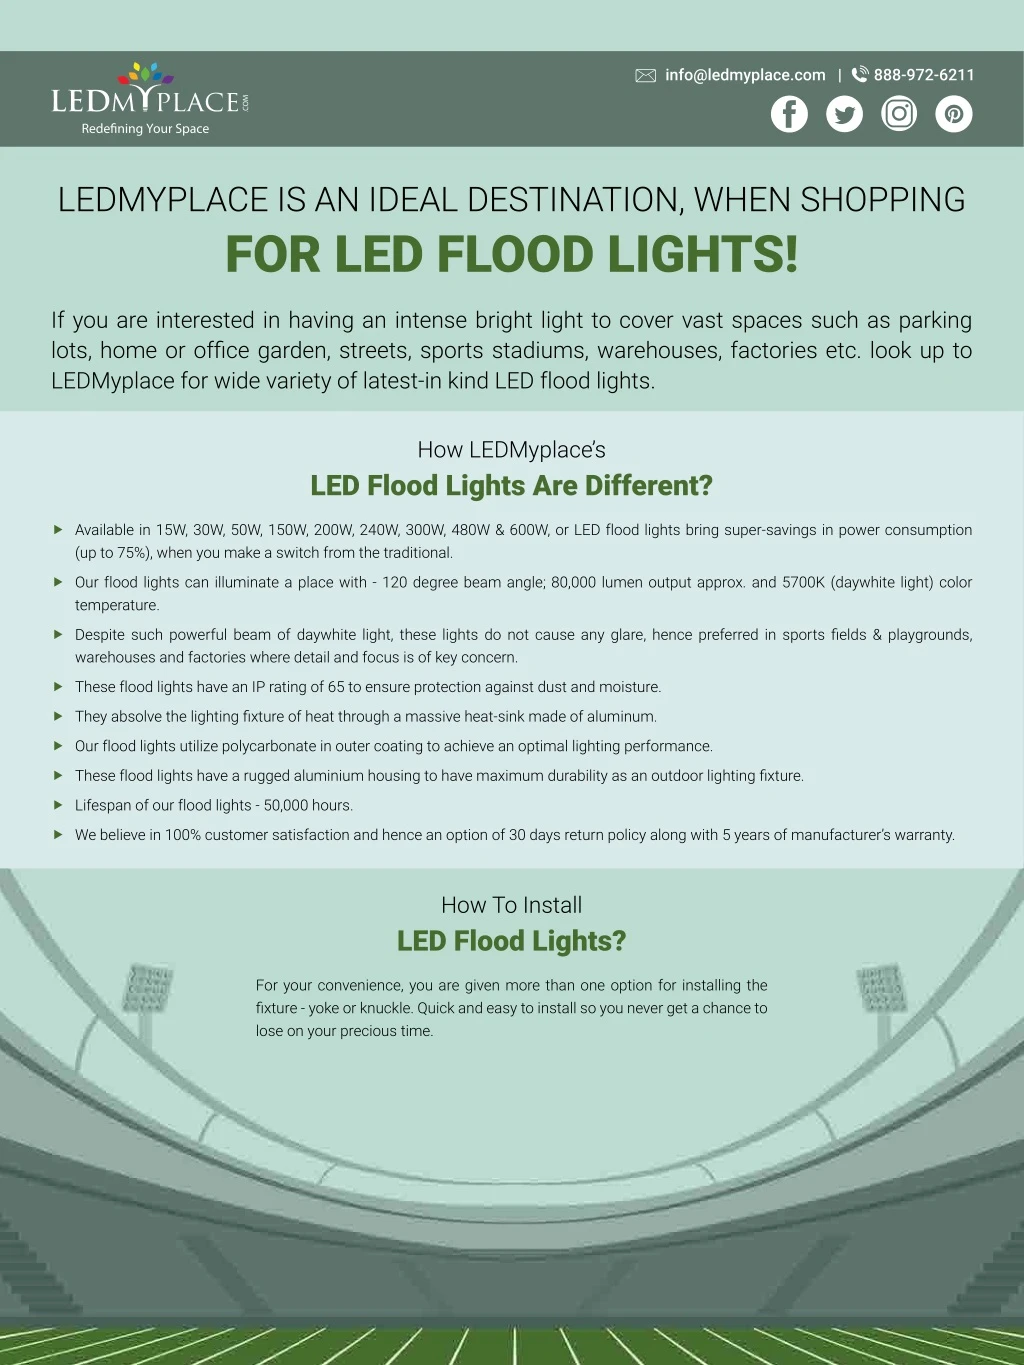 ledmyplace is an ideal destination when shopping